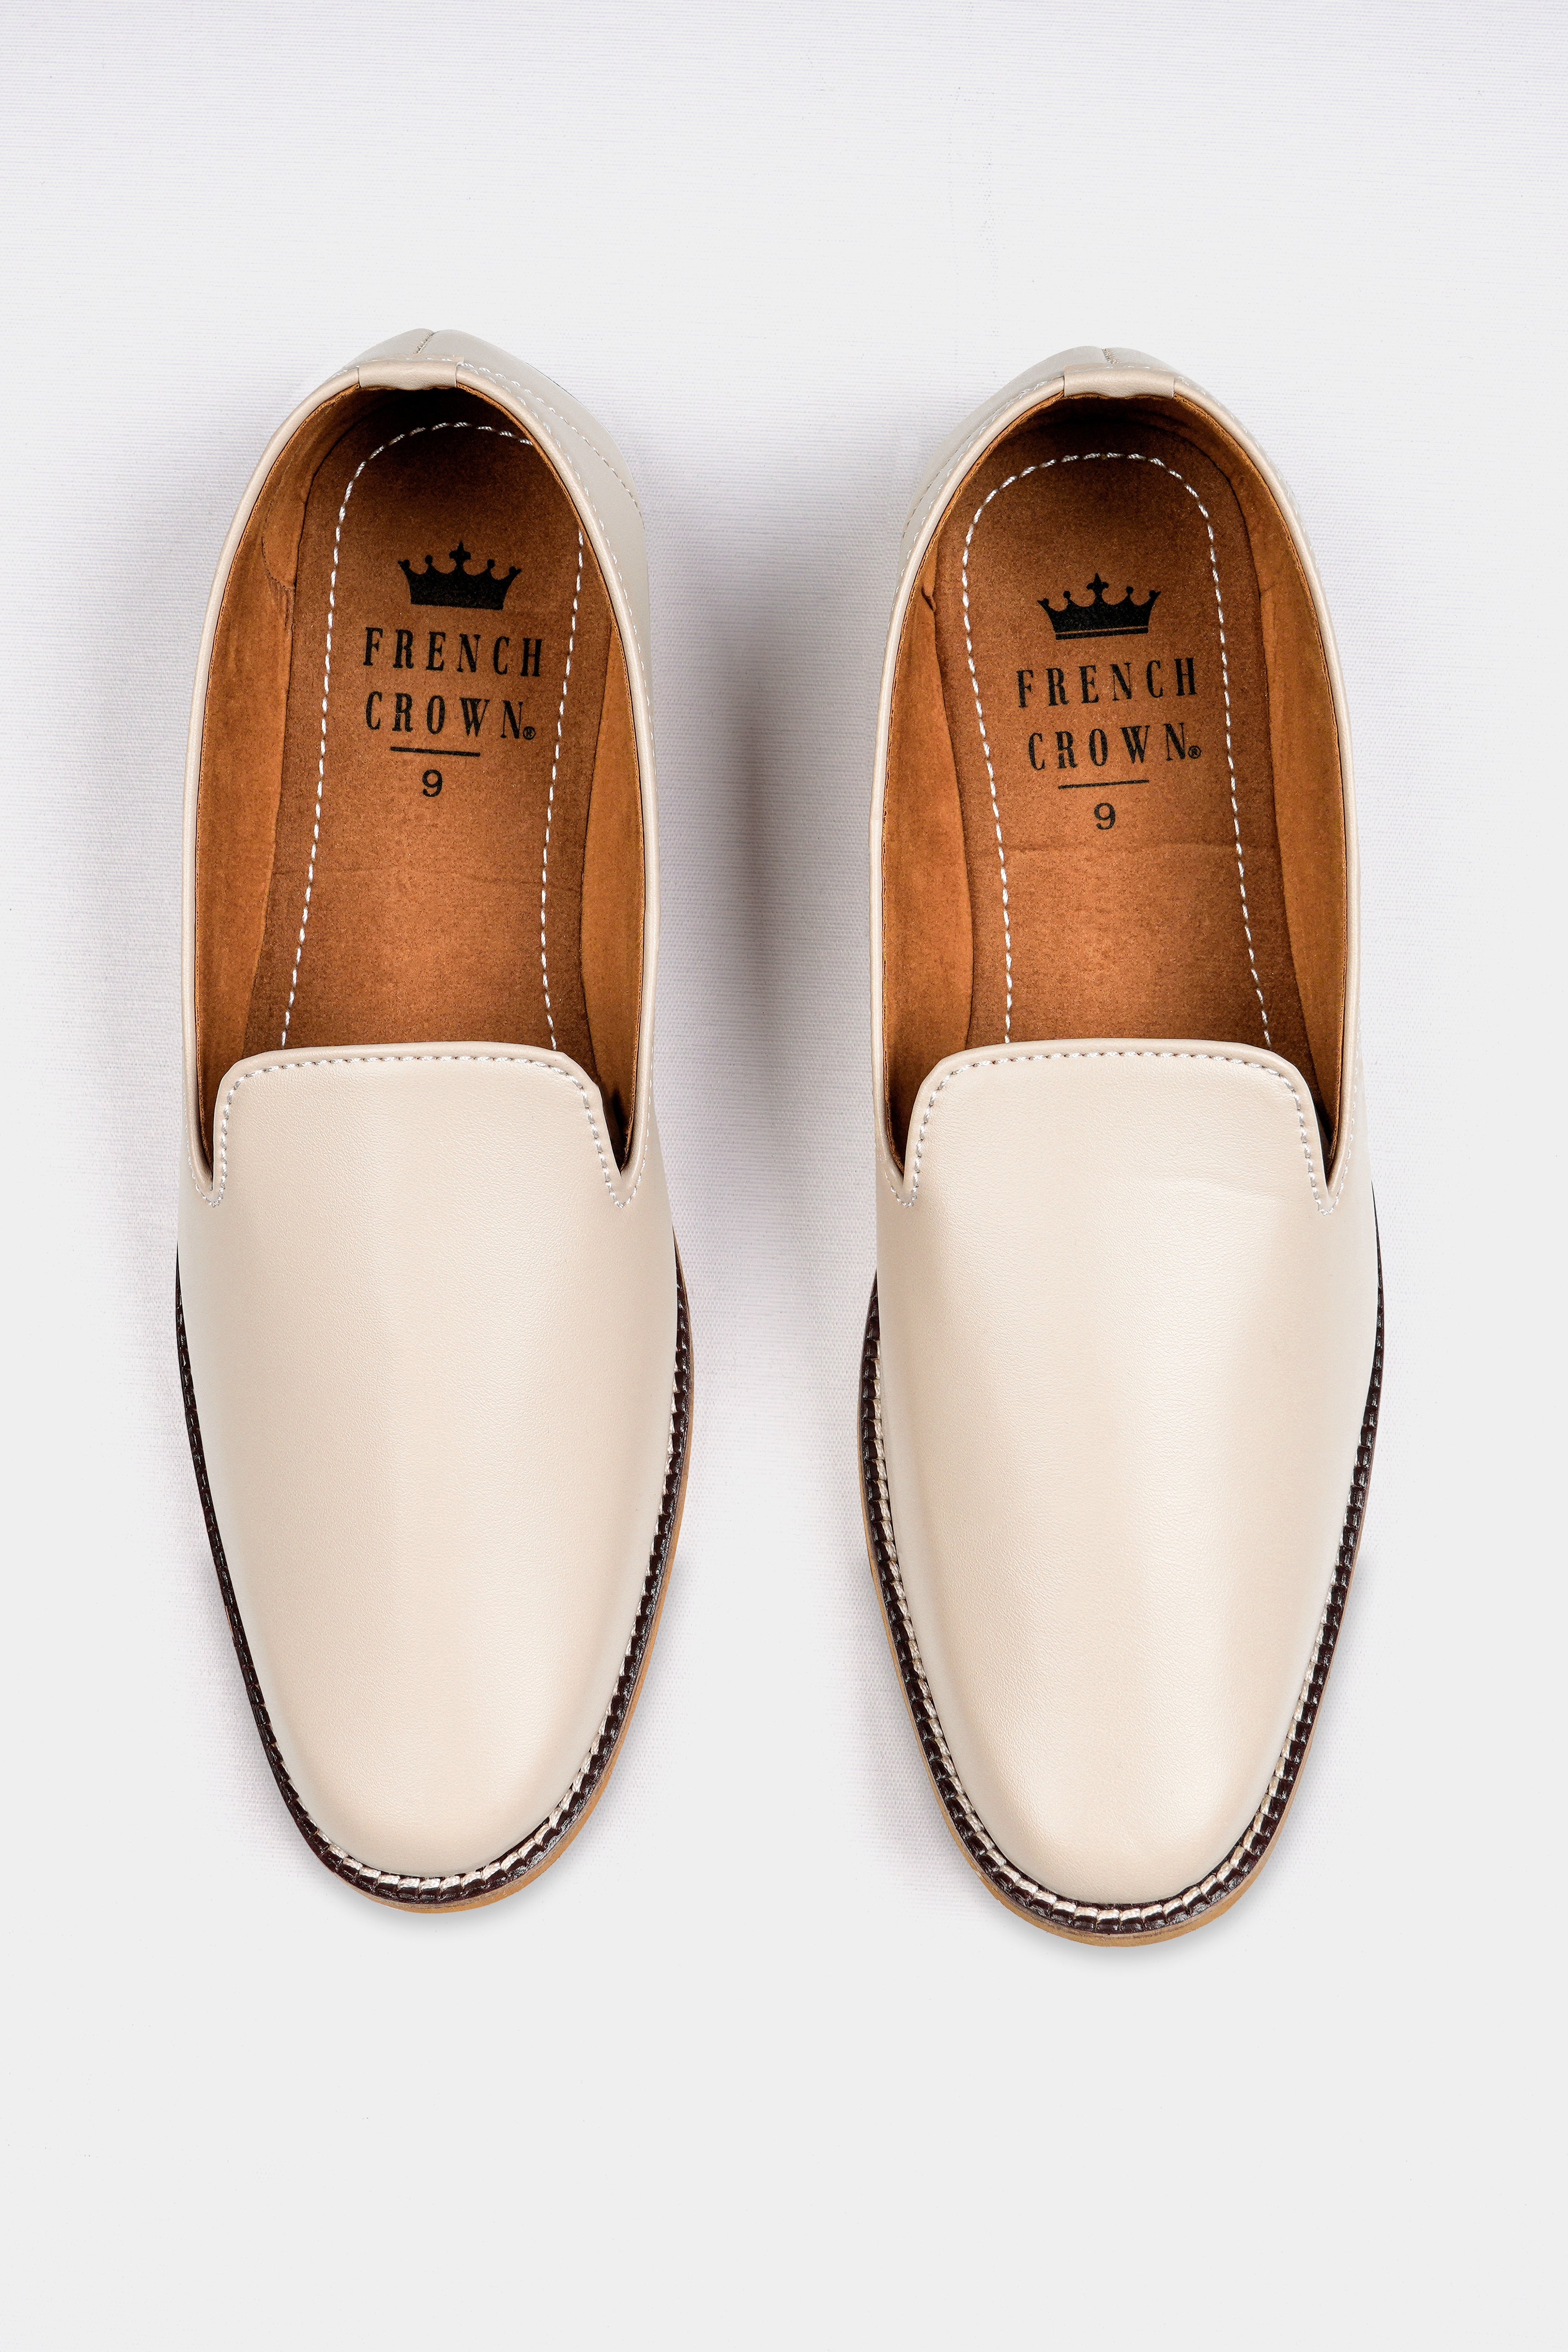 Cream Vegan Leather Hand Stitched Mojri Slip-On Shoes FT142-6, FT142-7, FT142-8, FT142-9, FT142-10, FT142-11